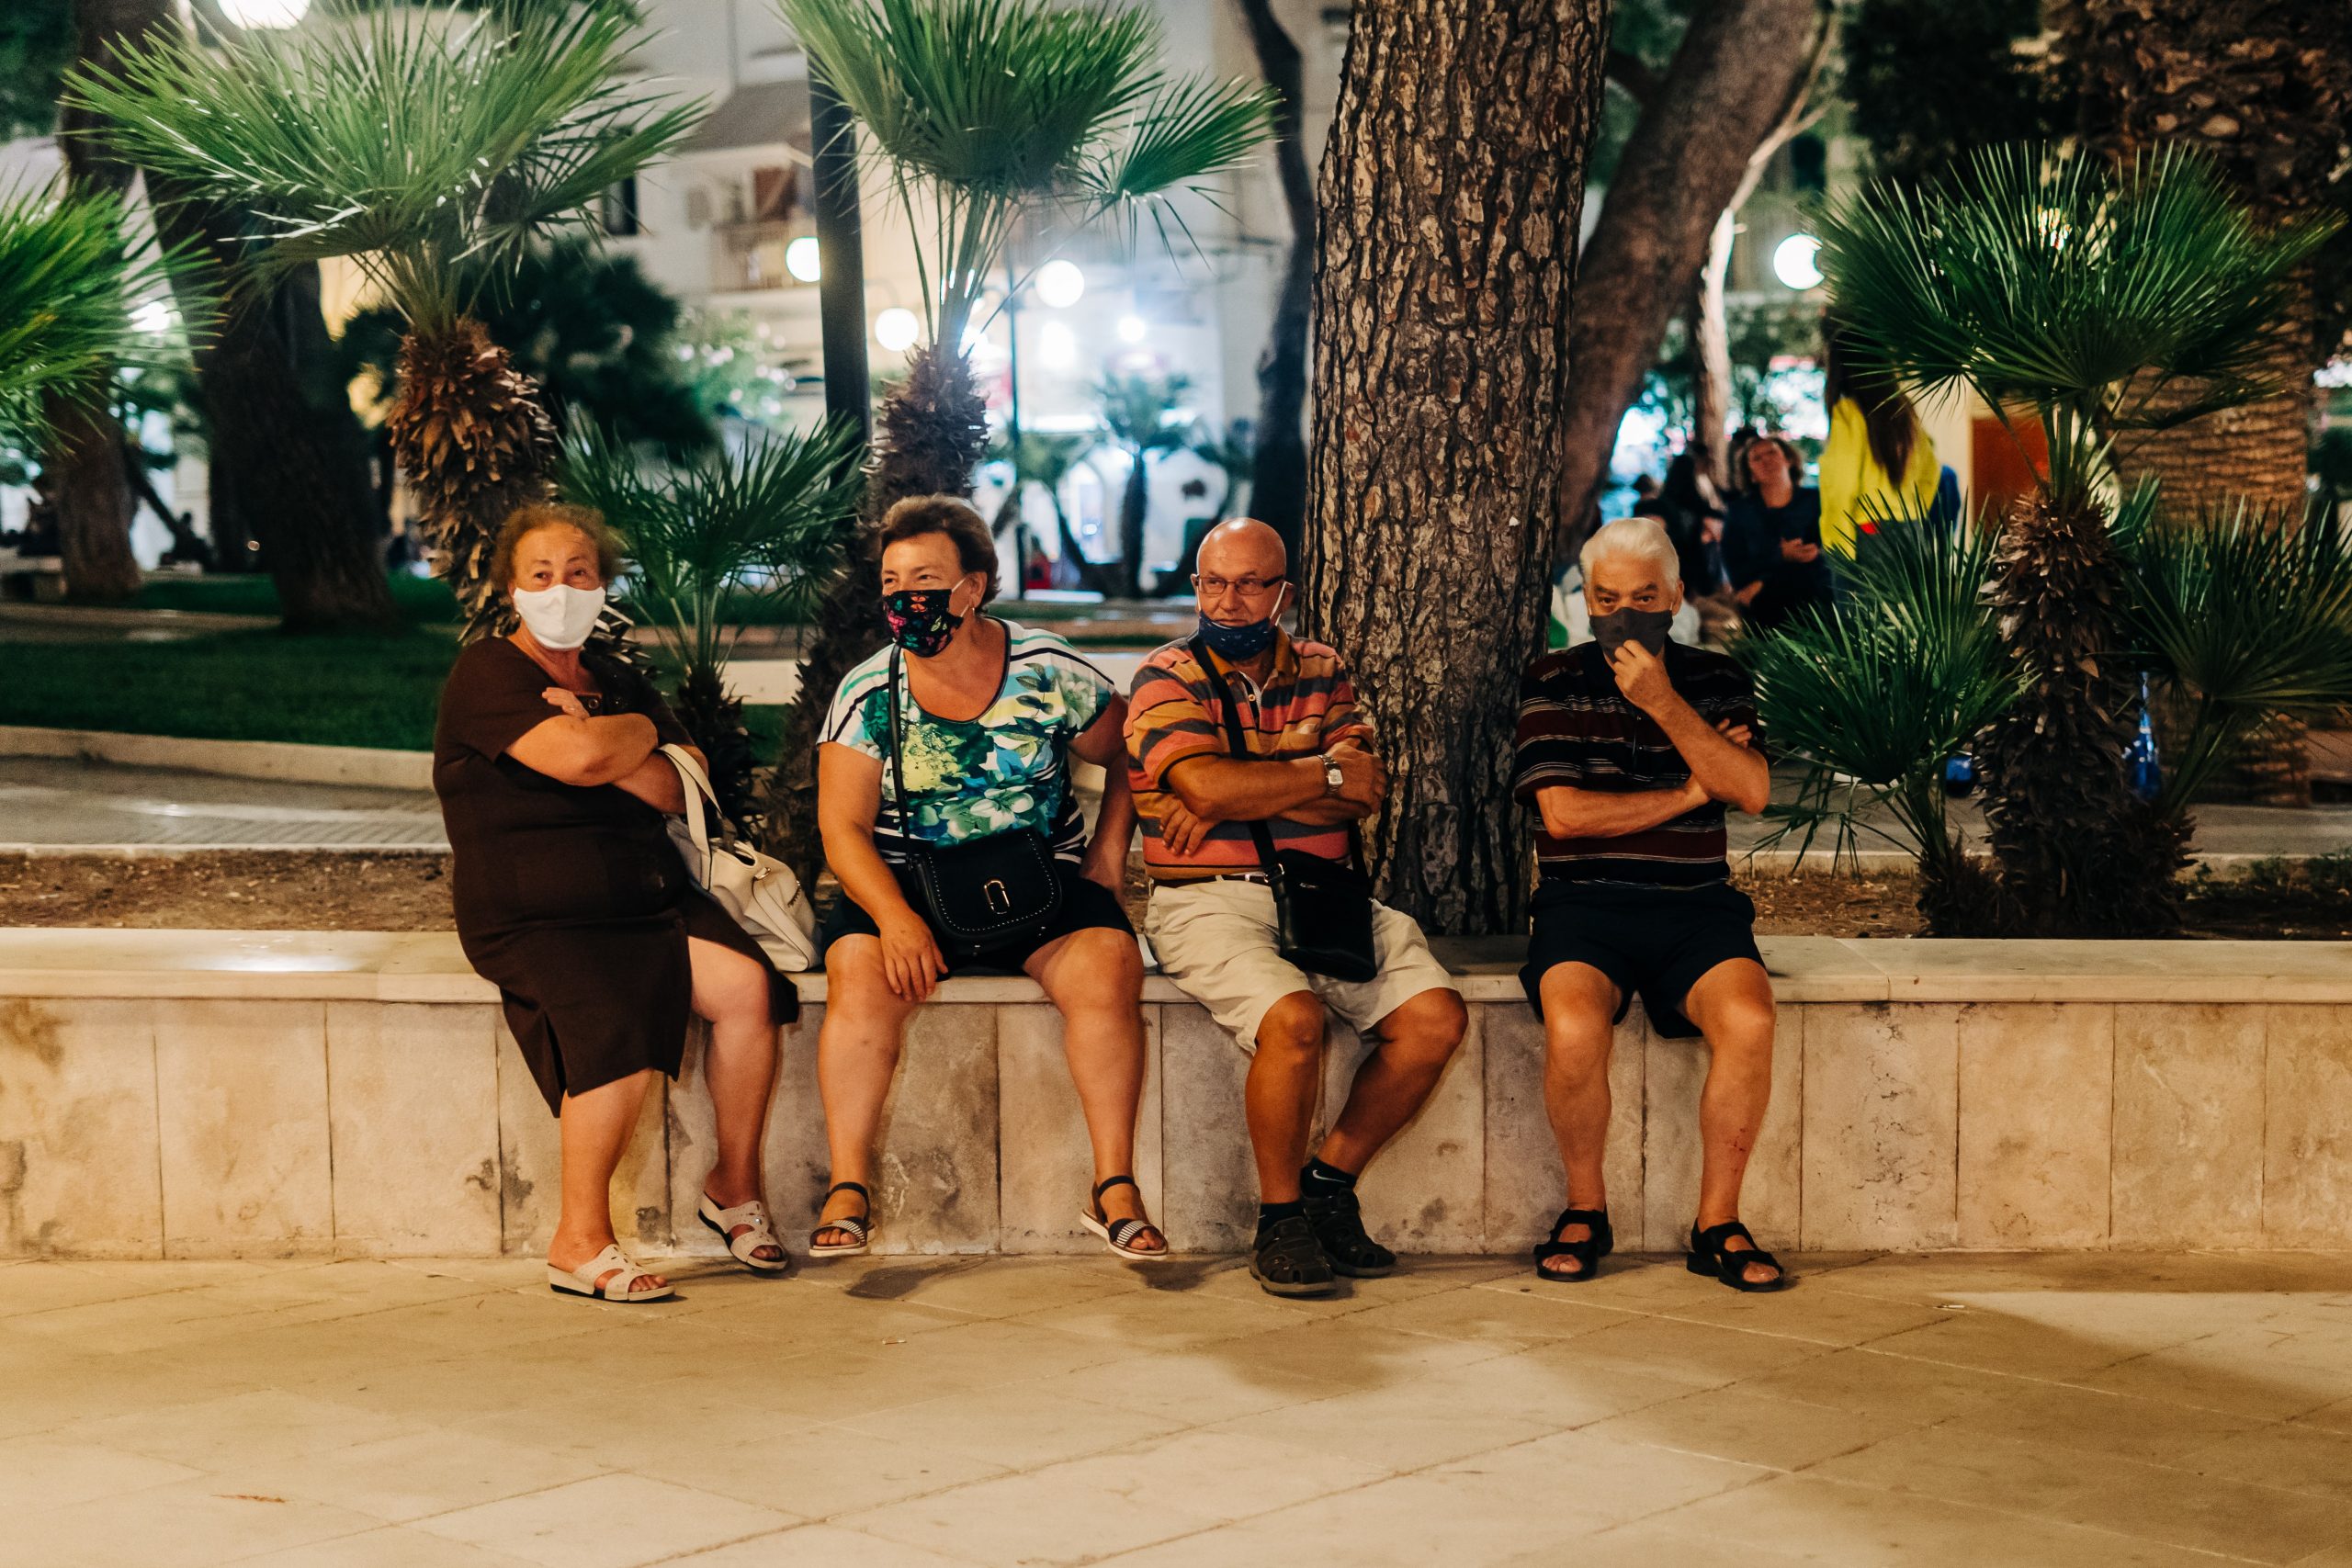 Italy: Masks off from June 28th